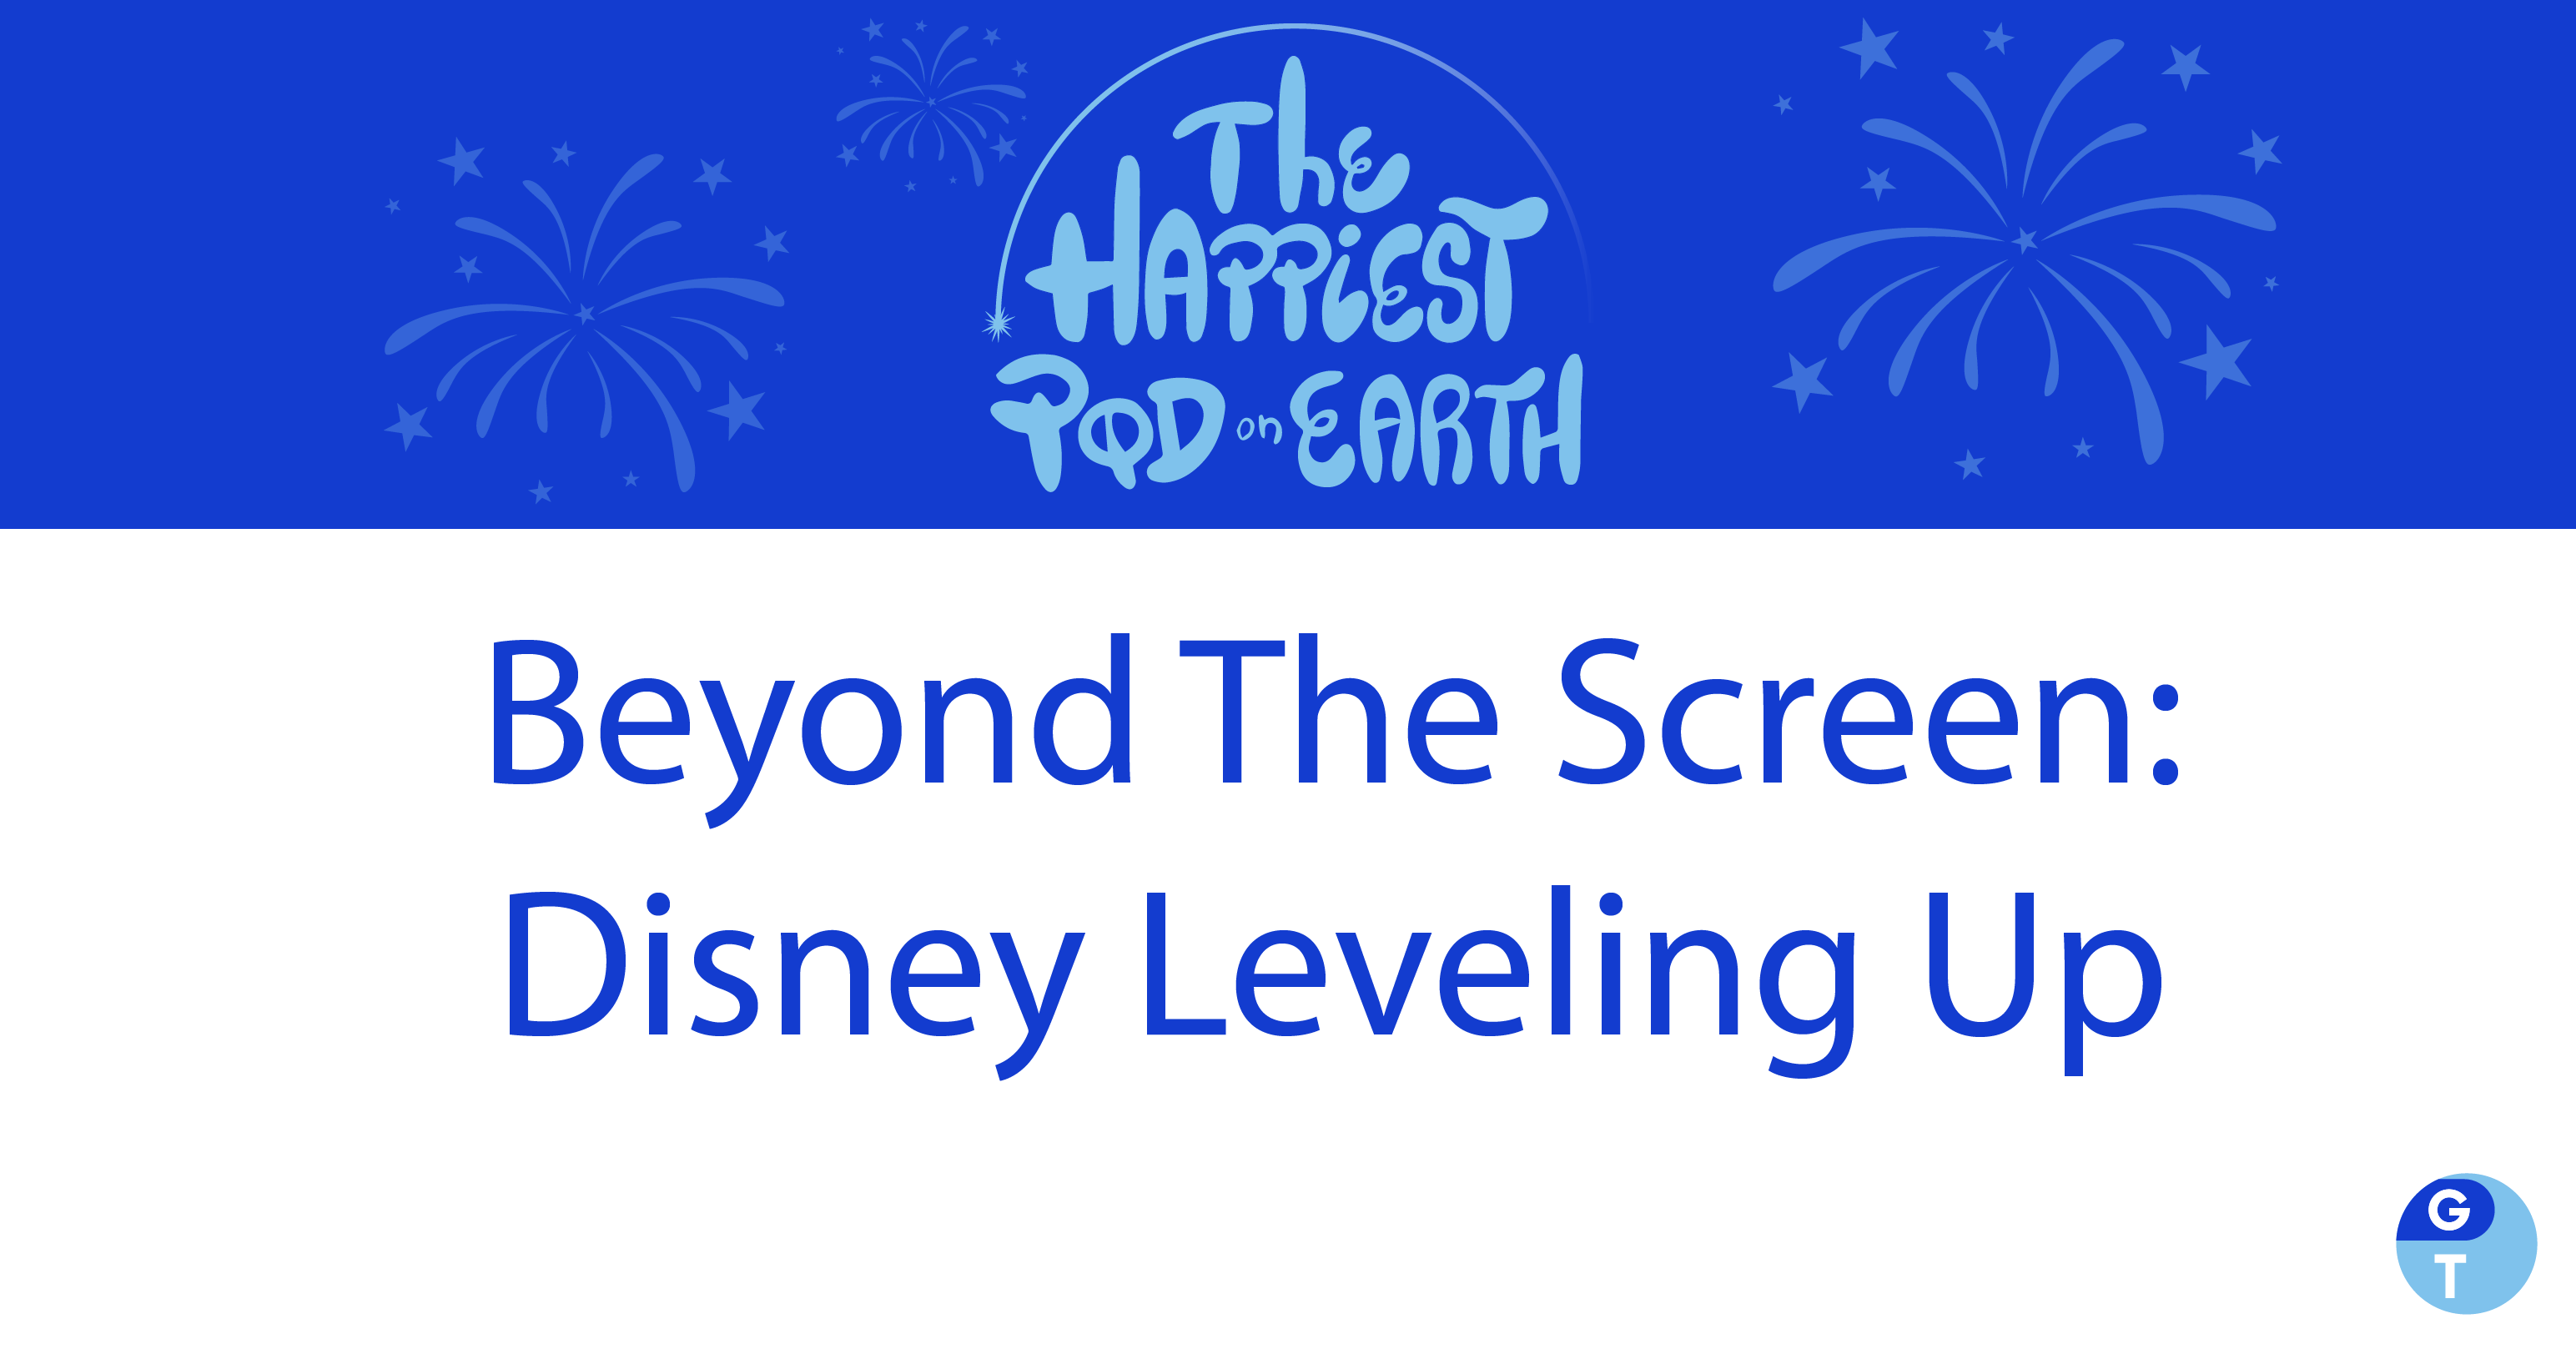 podcast logo of fireworks and podcast name "Beyond The Screen: Disney Leveling Up"